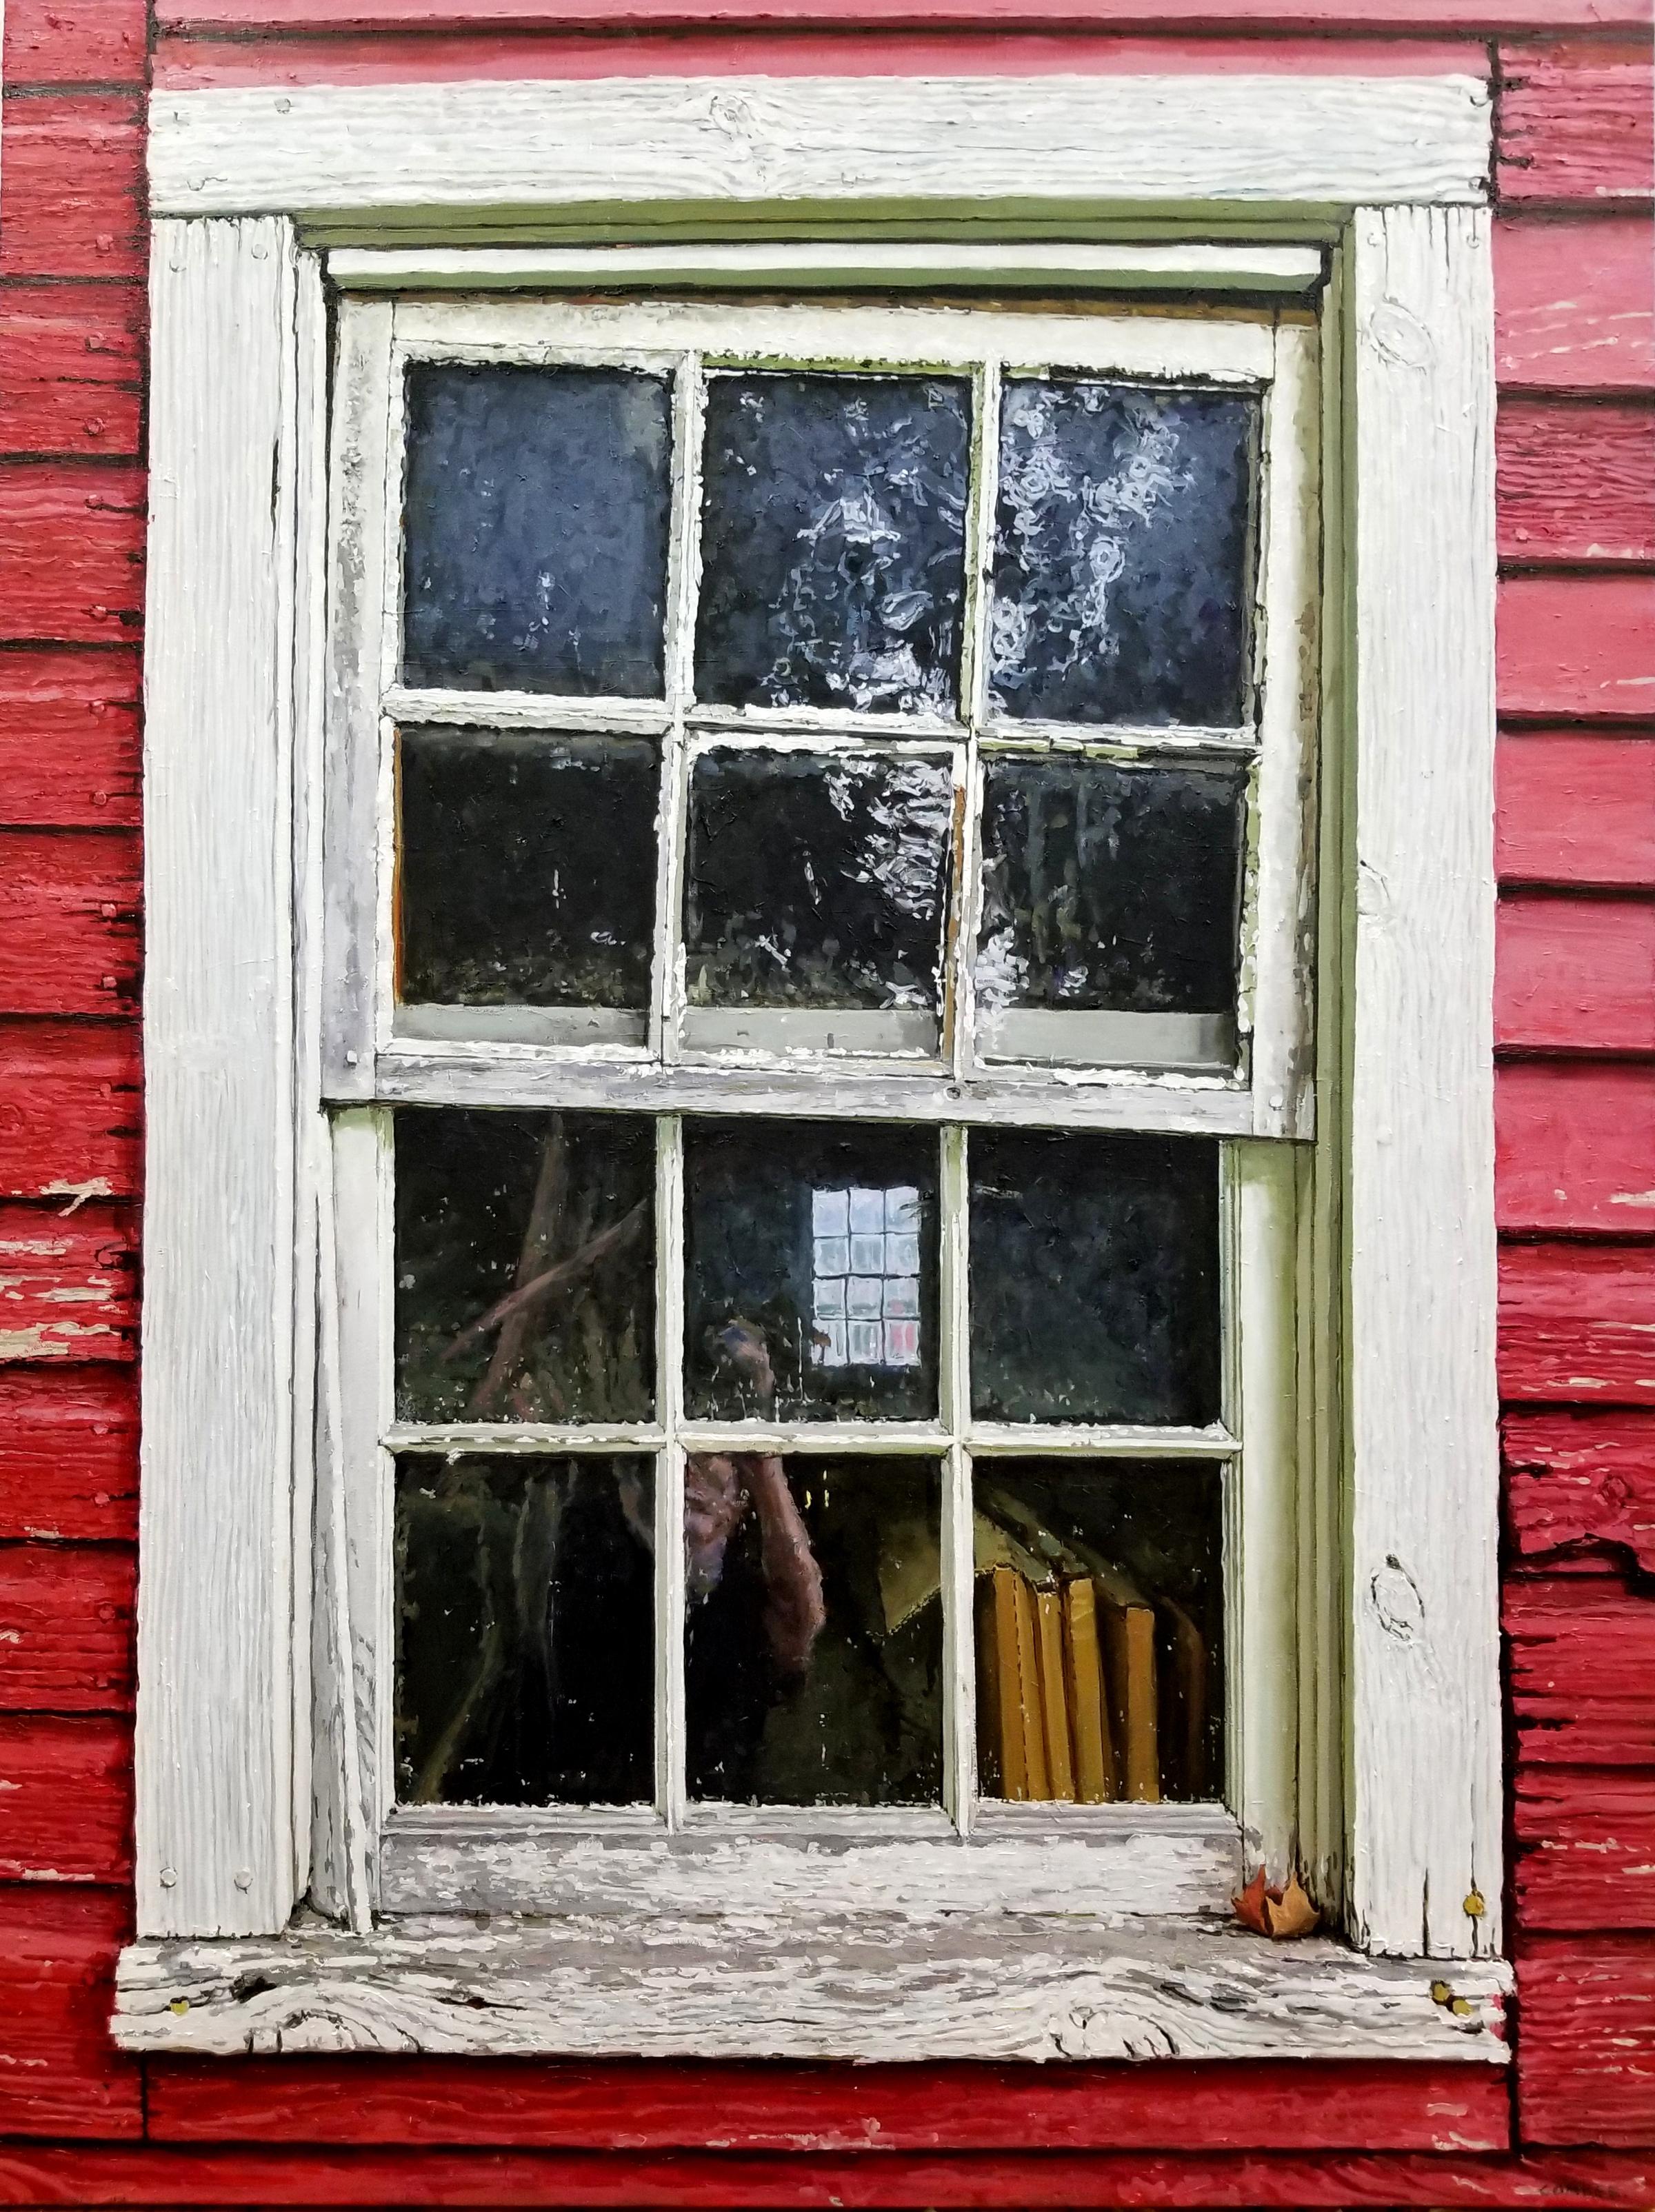 Richard Combes Landscape Painting - BARN WINDOW - Photorealism / Old Red Barn / Weathered Farmhouse / Reflection